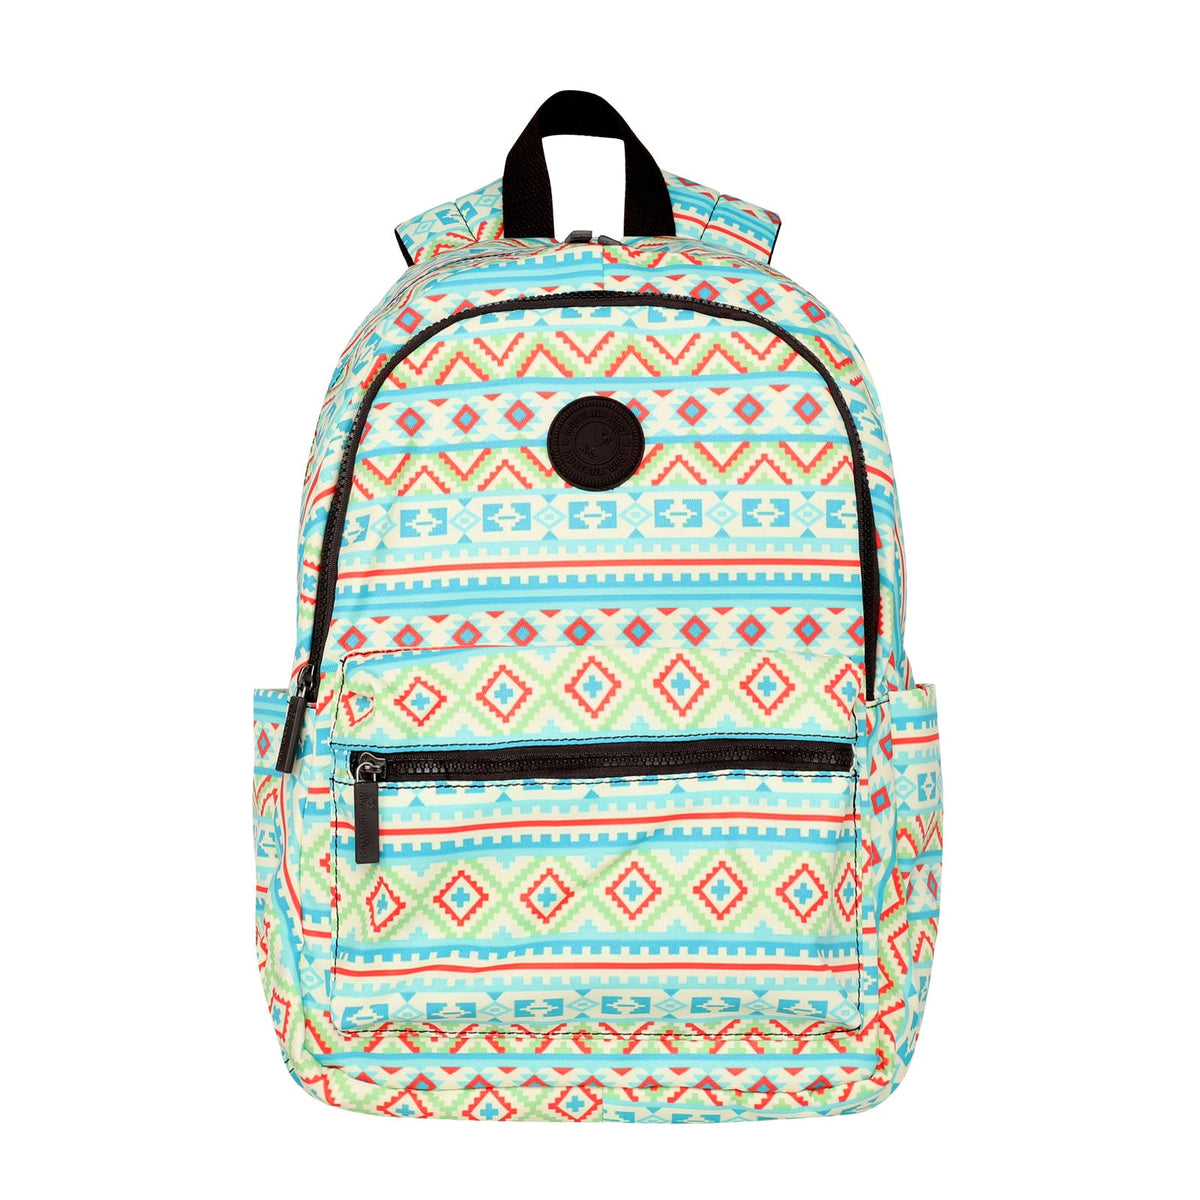 Montana West Blue Aztec Print Backpack - Cowgirl Wear